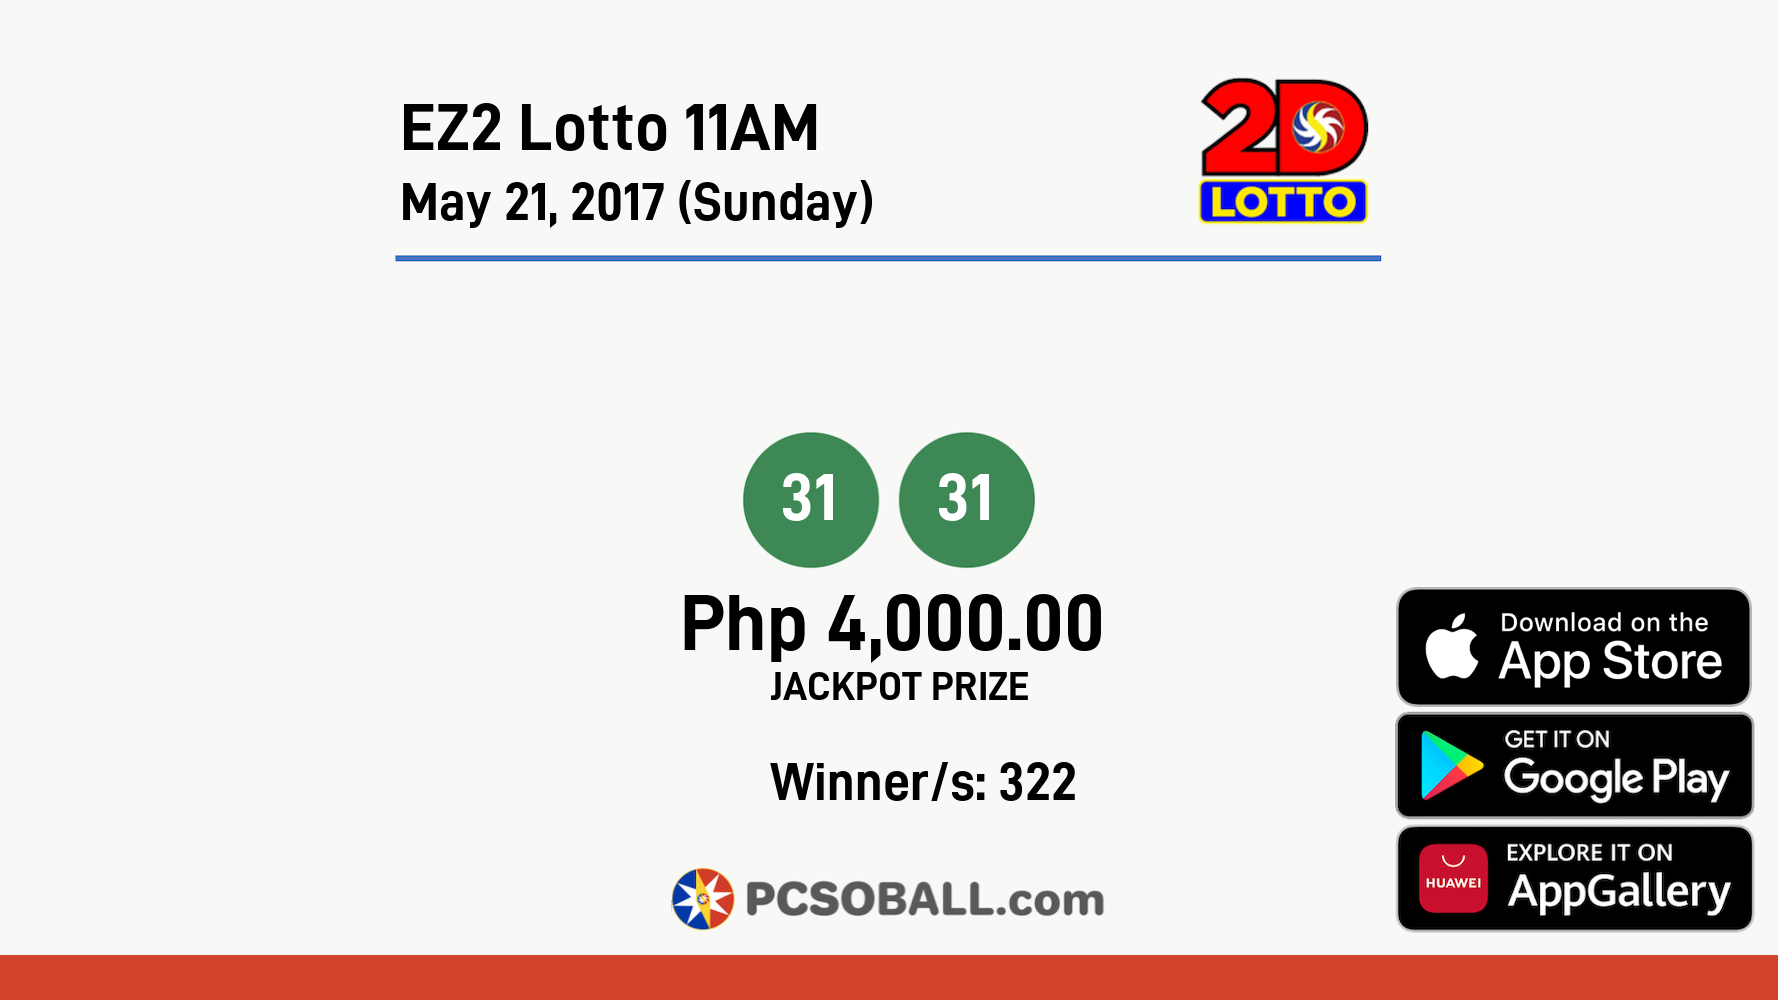 EZ2 Lotto 11AM May 21, 2017 (Sunday) Result